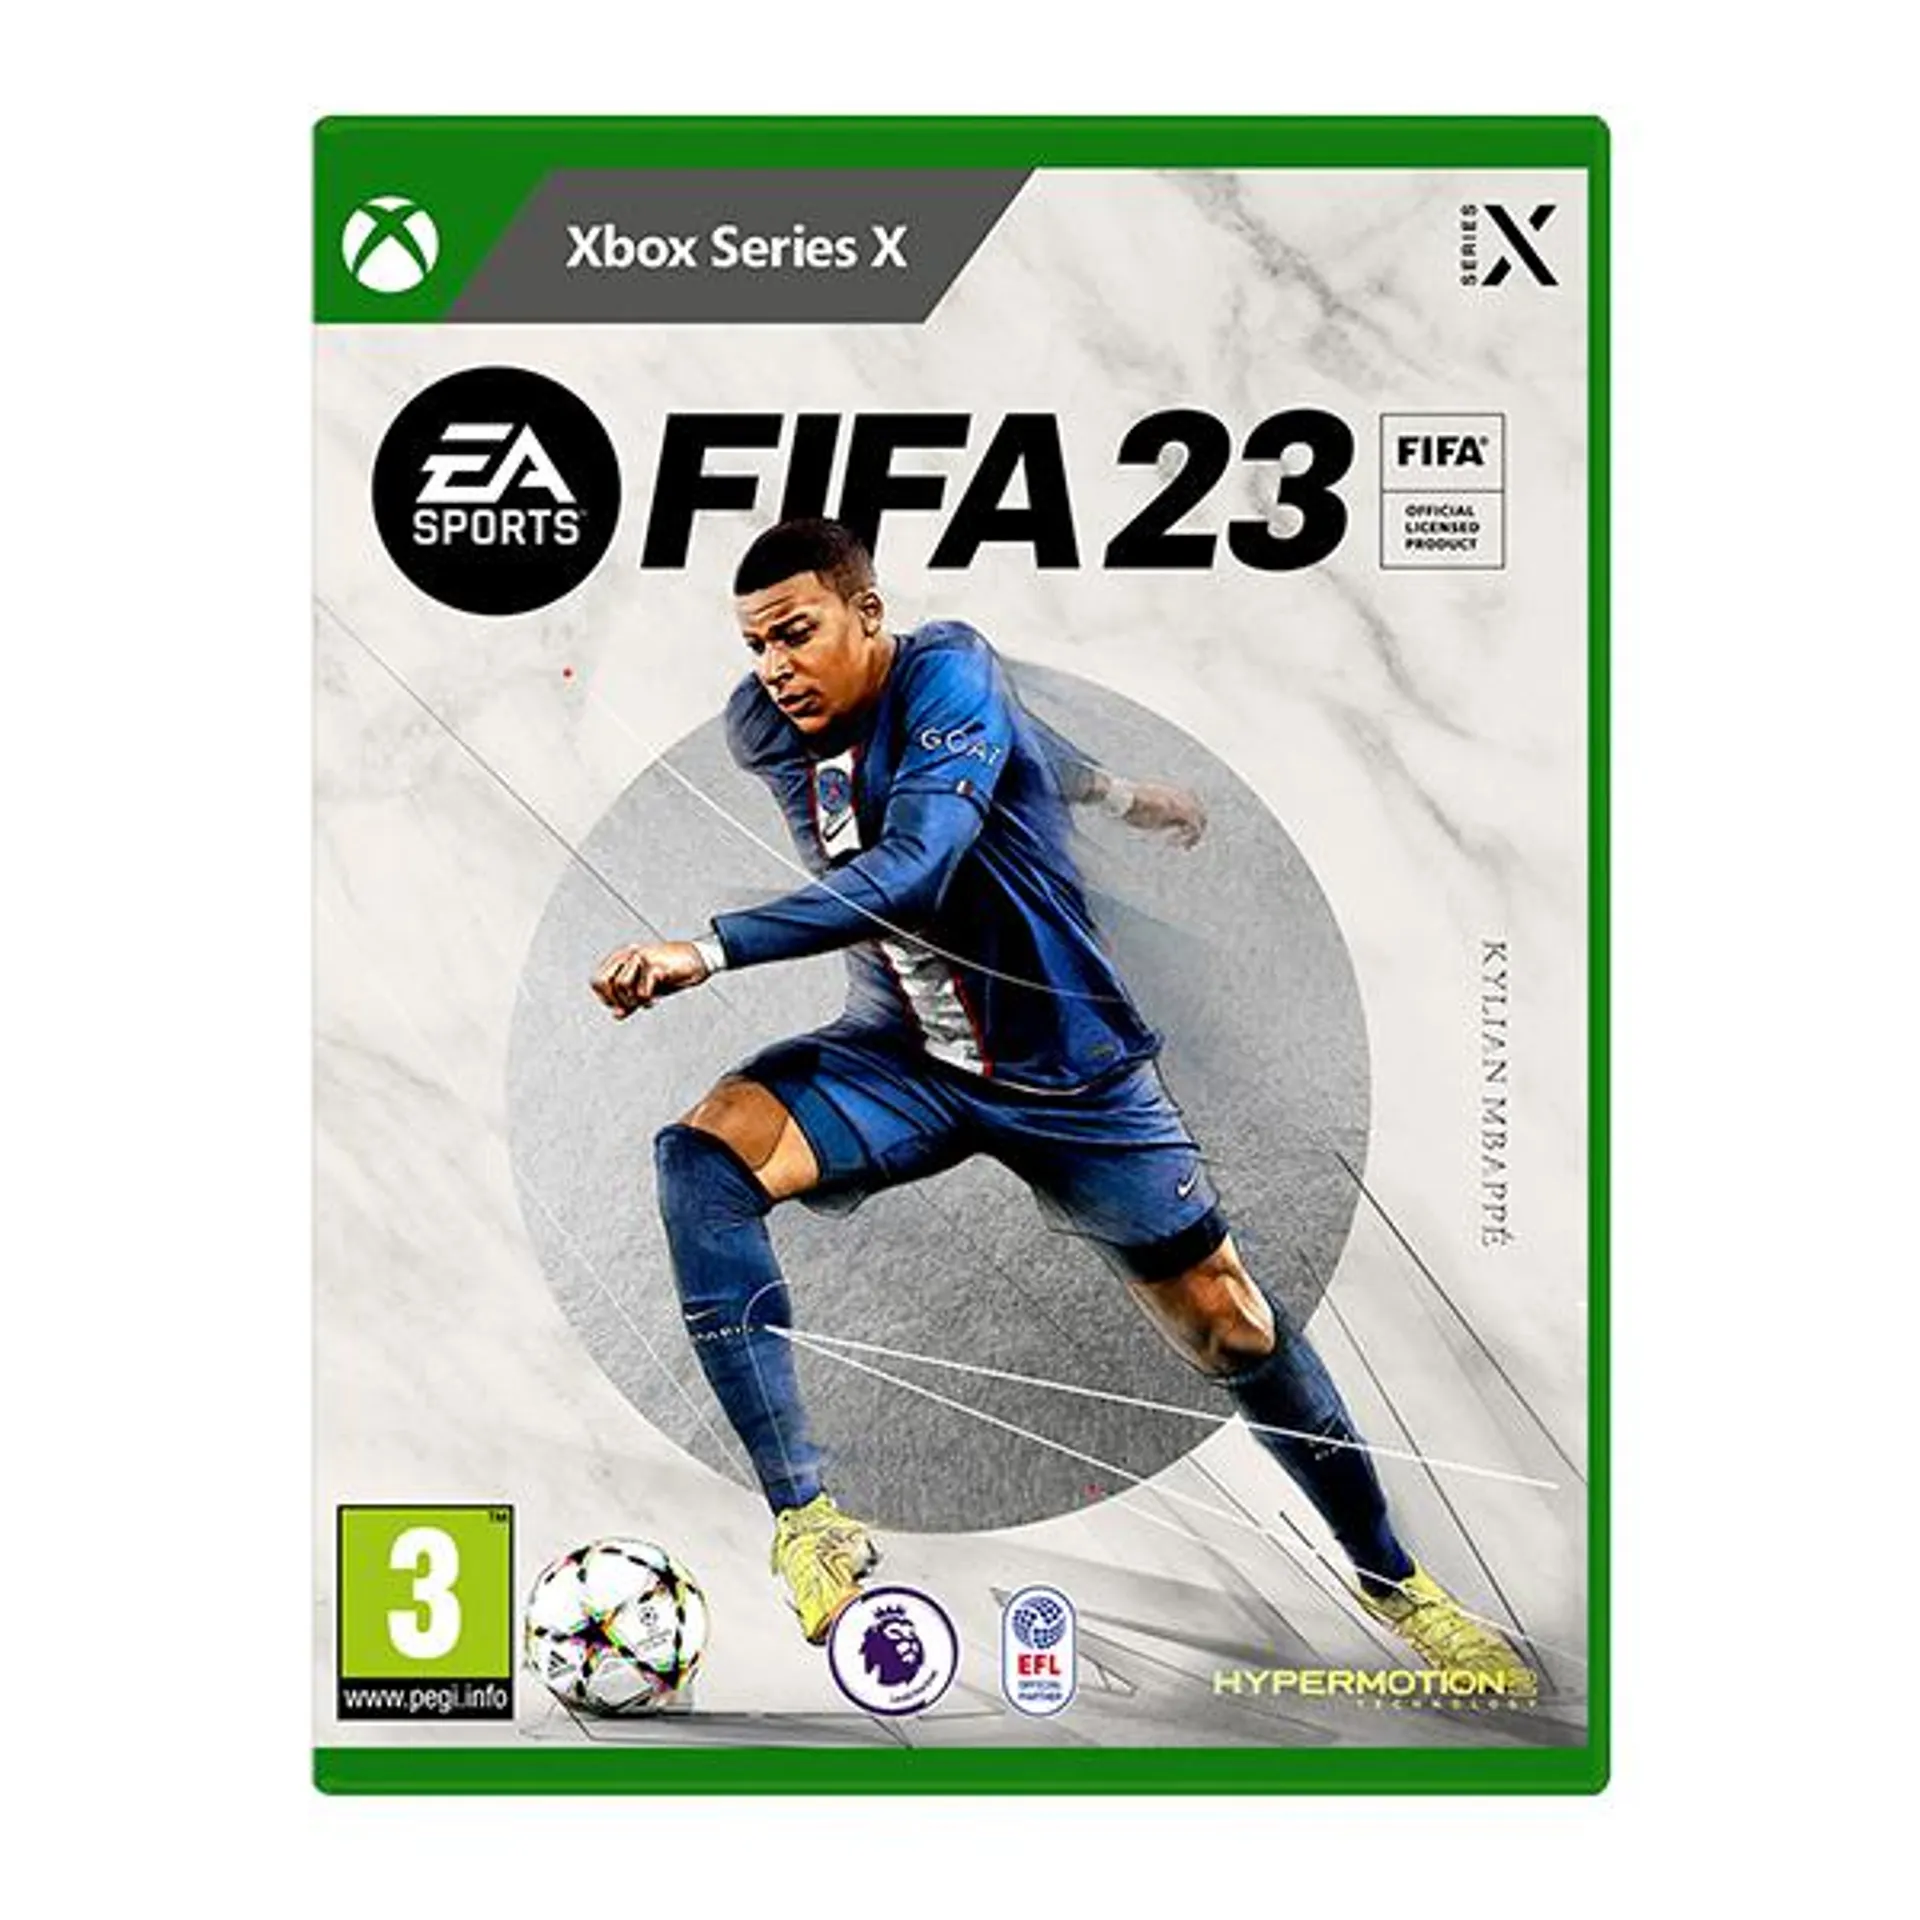 FIFA 23 for Xbox Series X